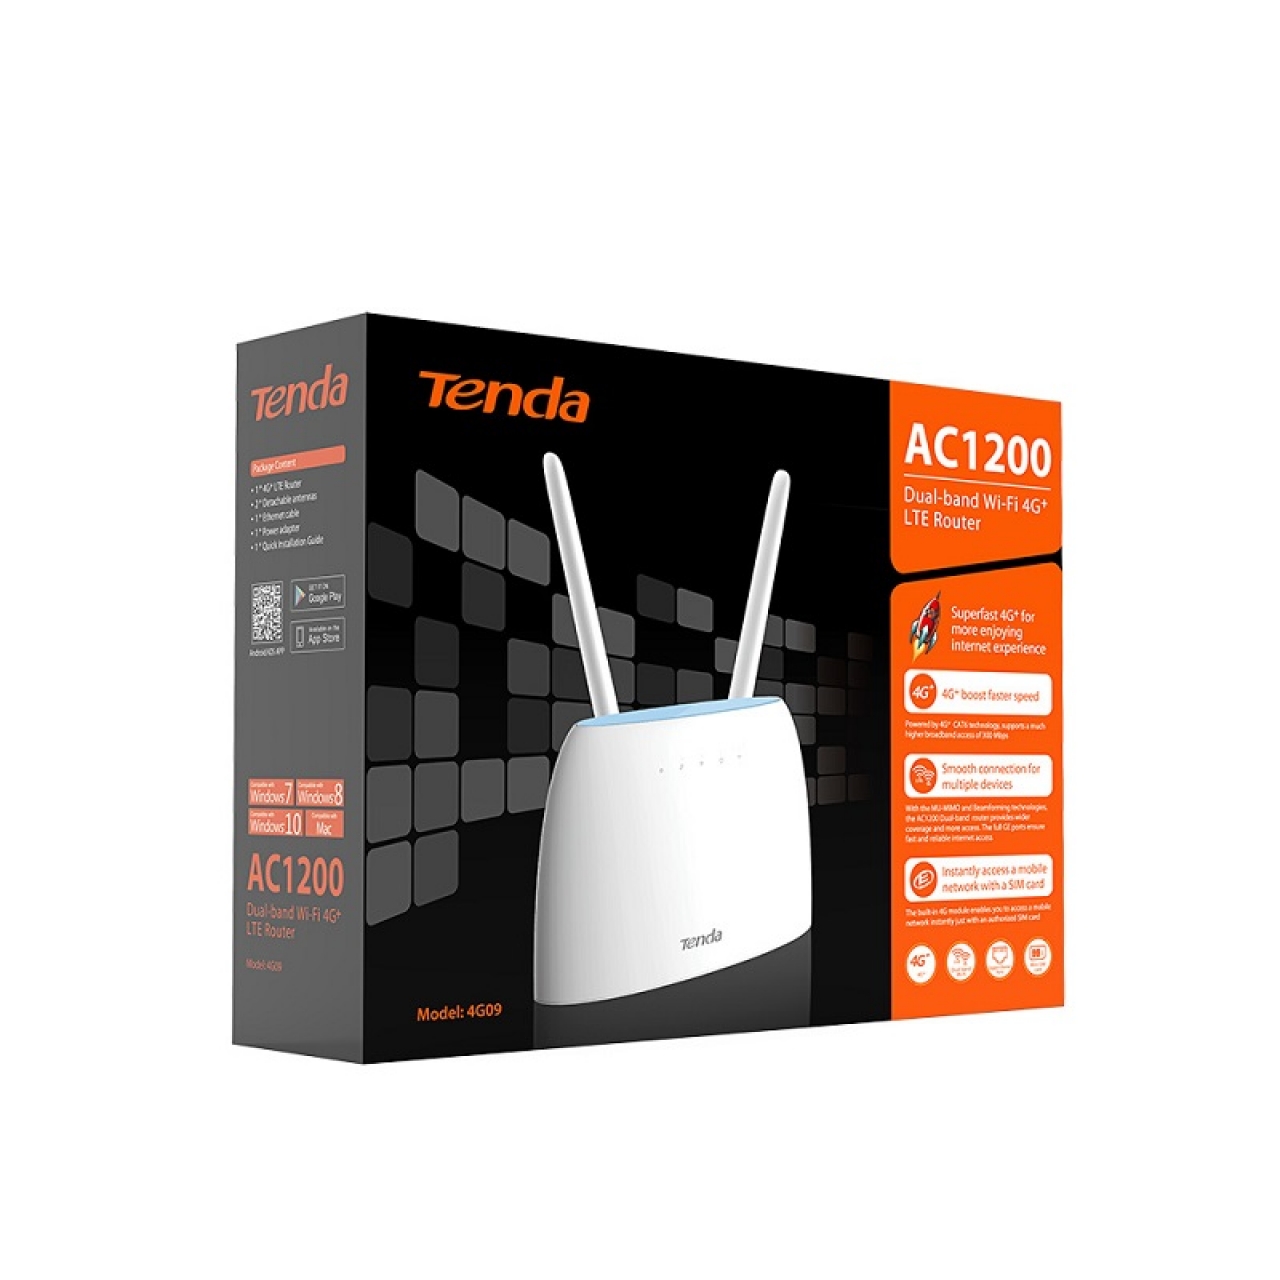 TENDA 4G09 4G301 1200mbps AC1200 Dual Band 4G LTE Router